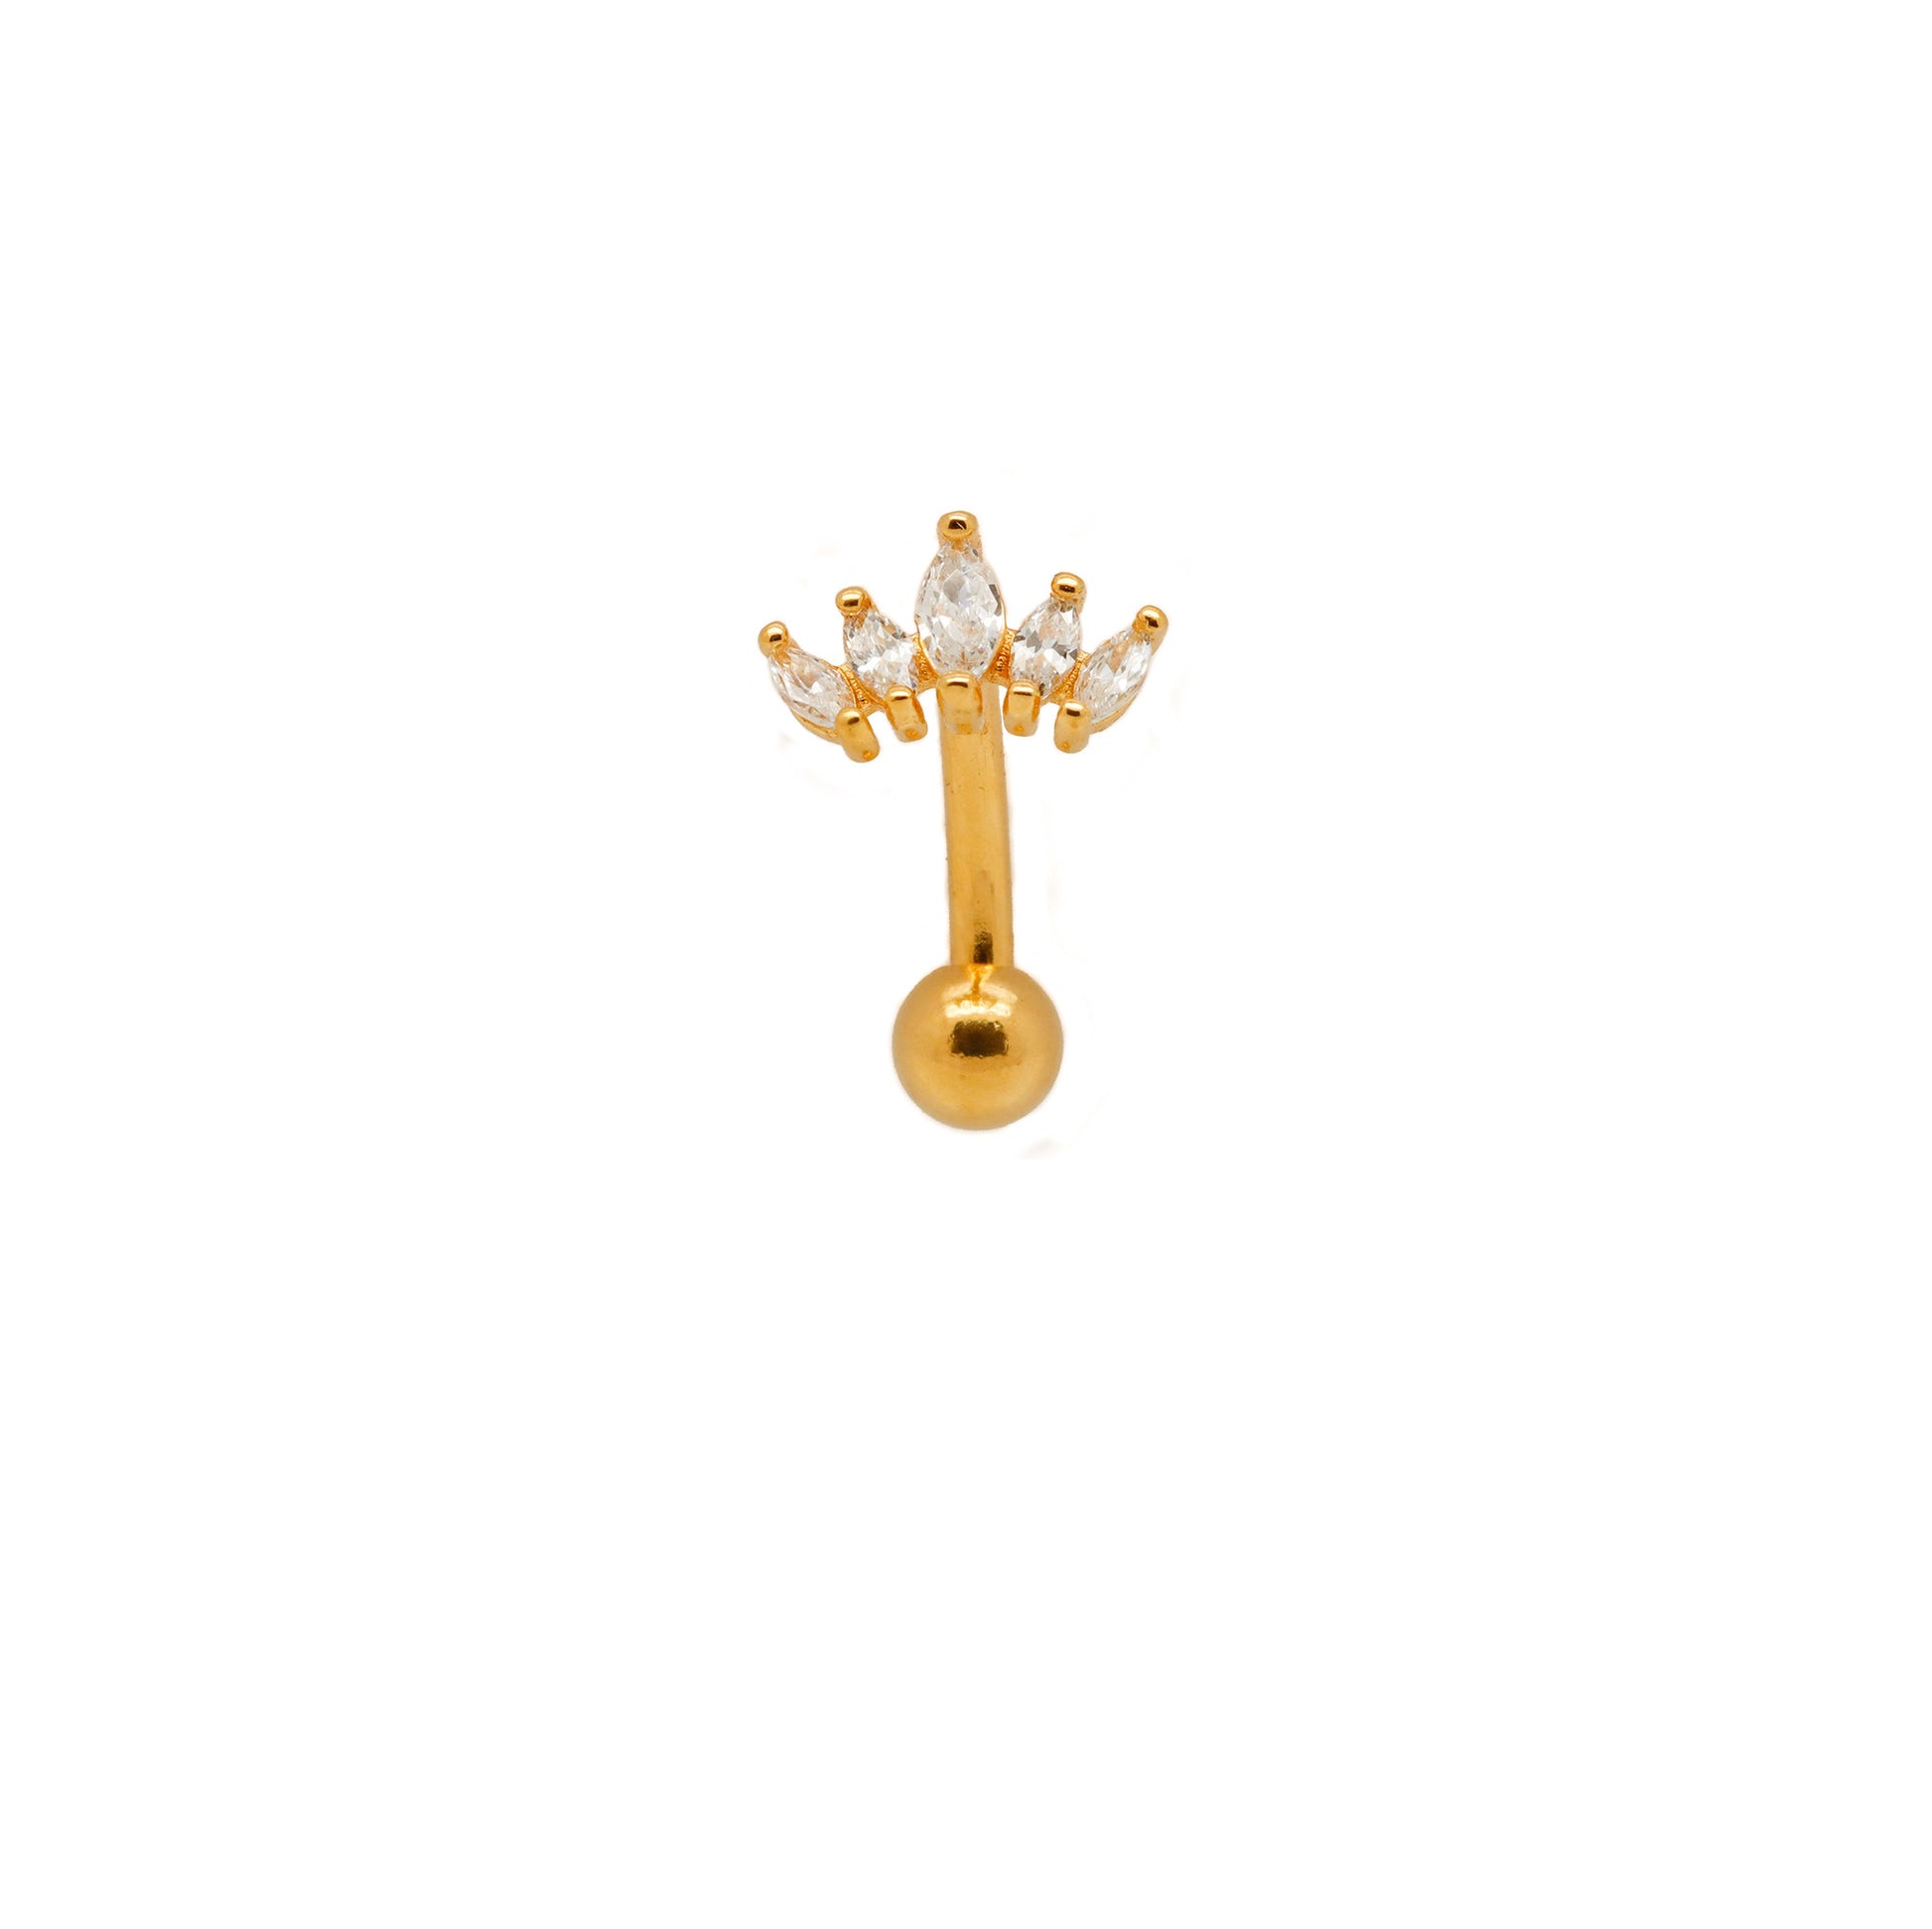 Vermeil | 24k Gold Coated 925 Silver 16G/14G Petite Tiara Reverse Belly Ring | 6mm 1/4" 8mm 5/16" 10mm 3/8" - Sturdy South